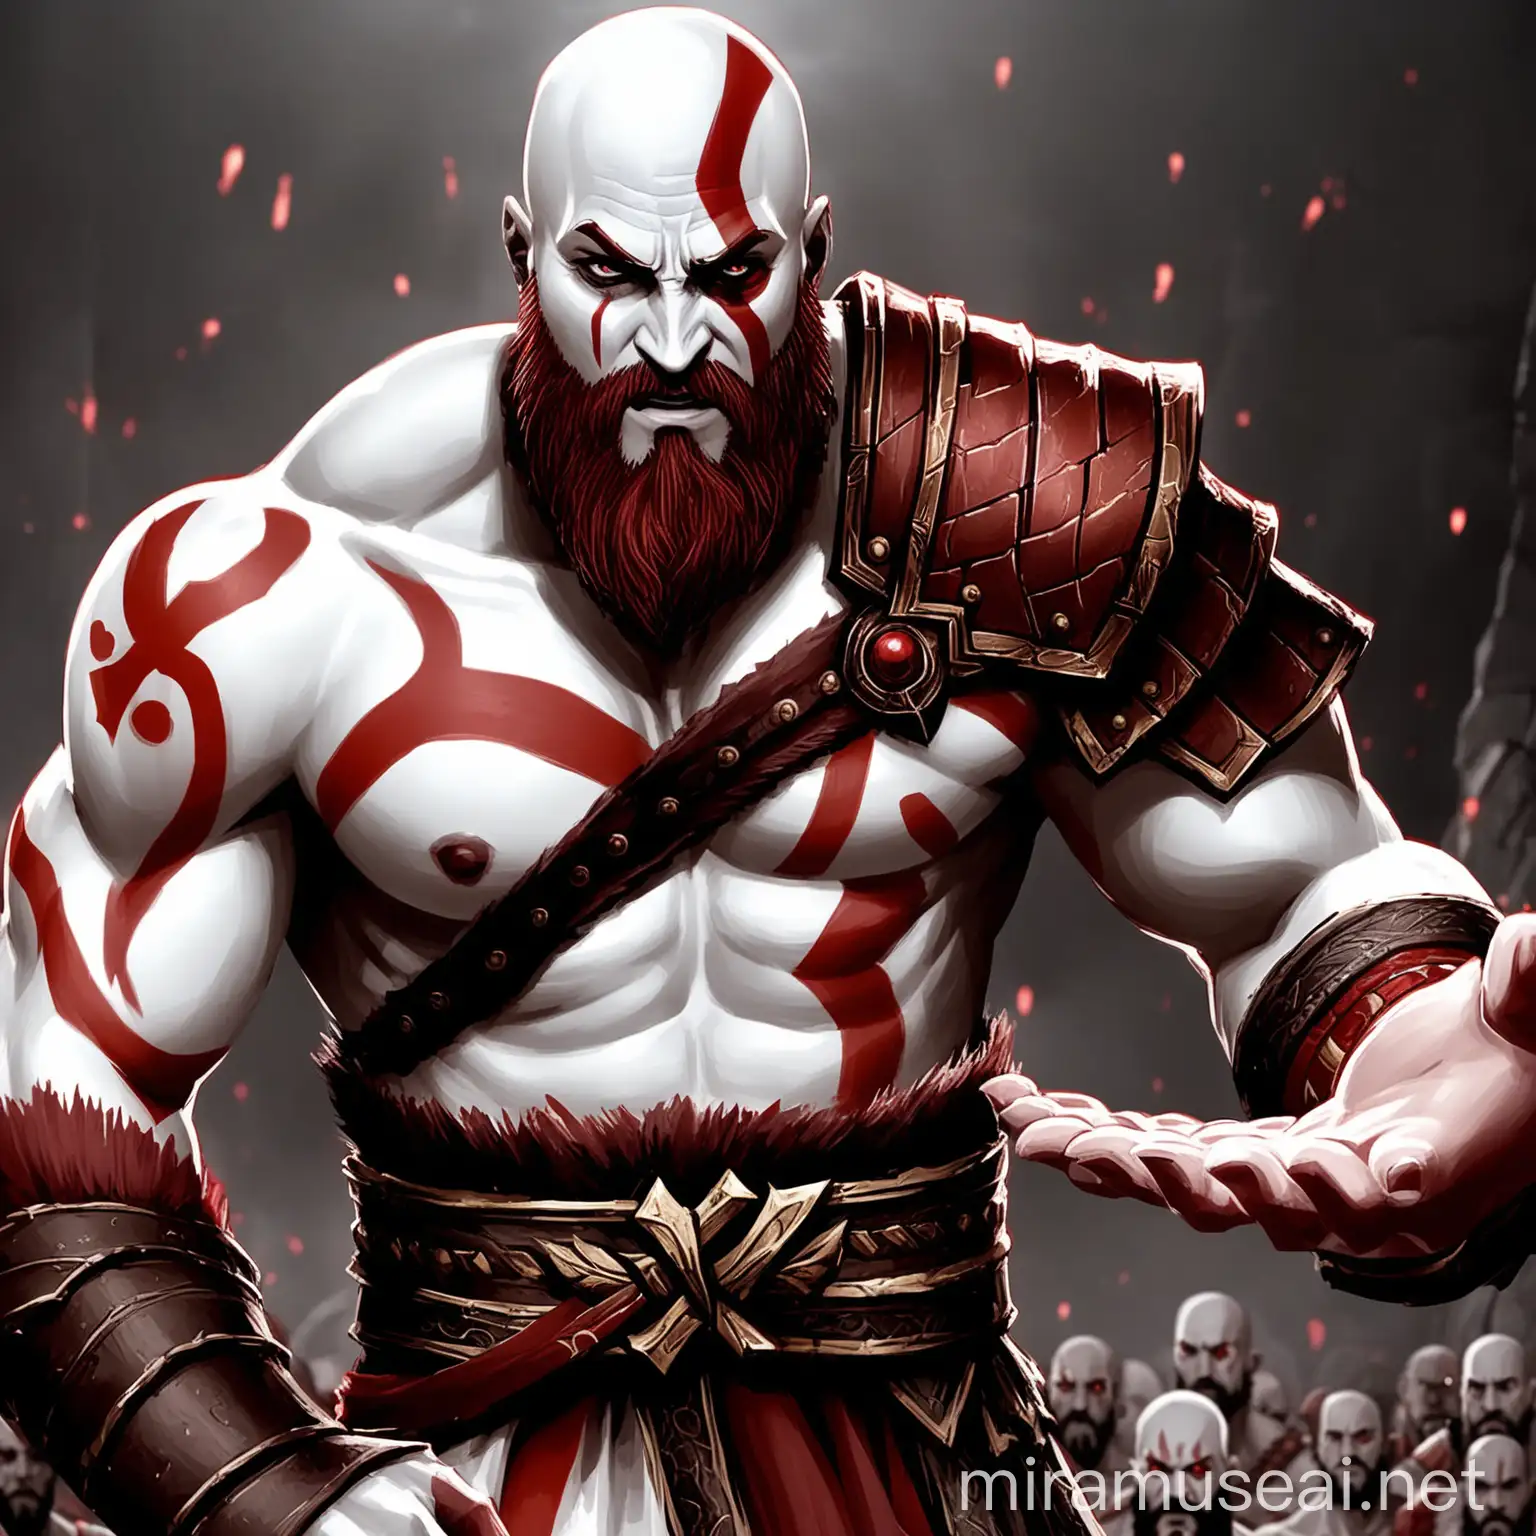 generate kratos from god war who has an outstretched hand It's like he's trying to set someone up